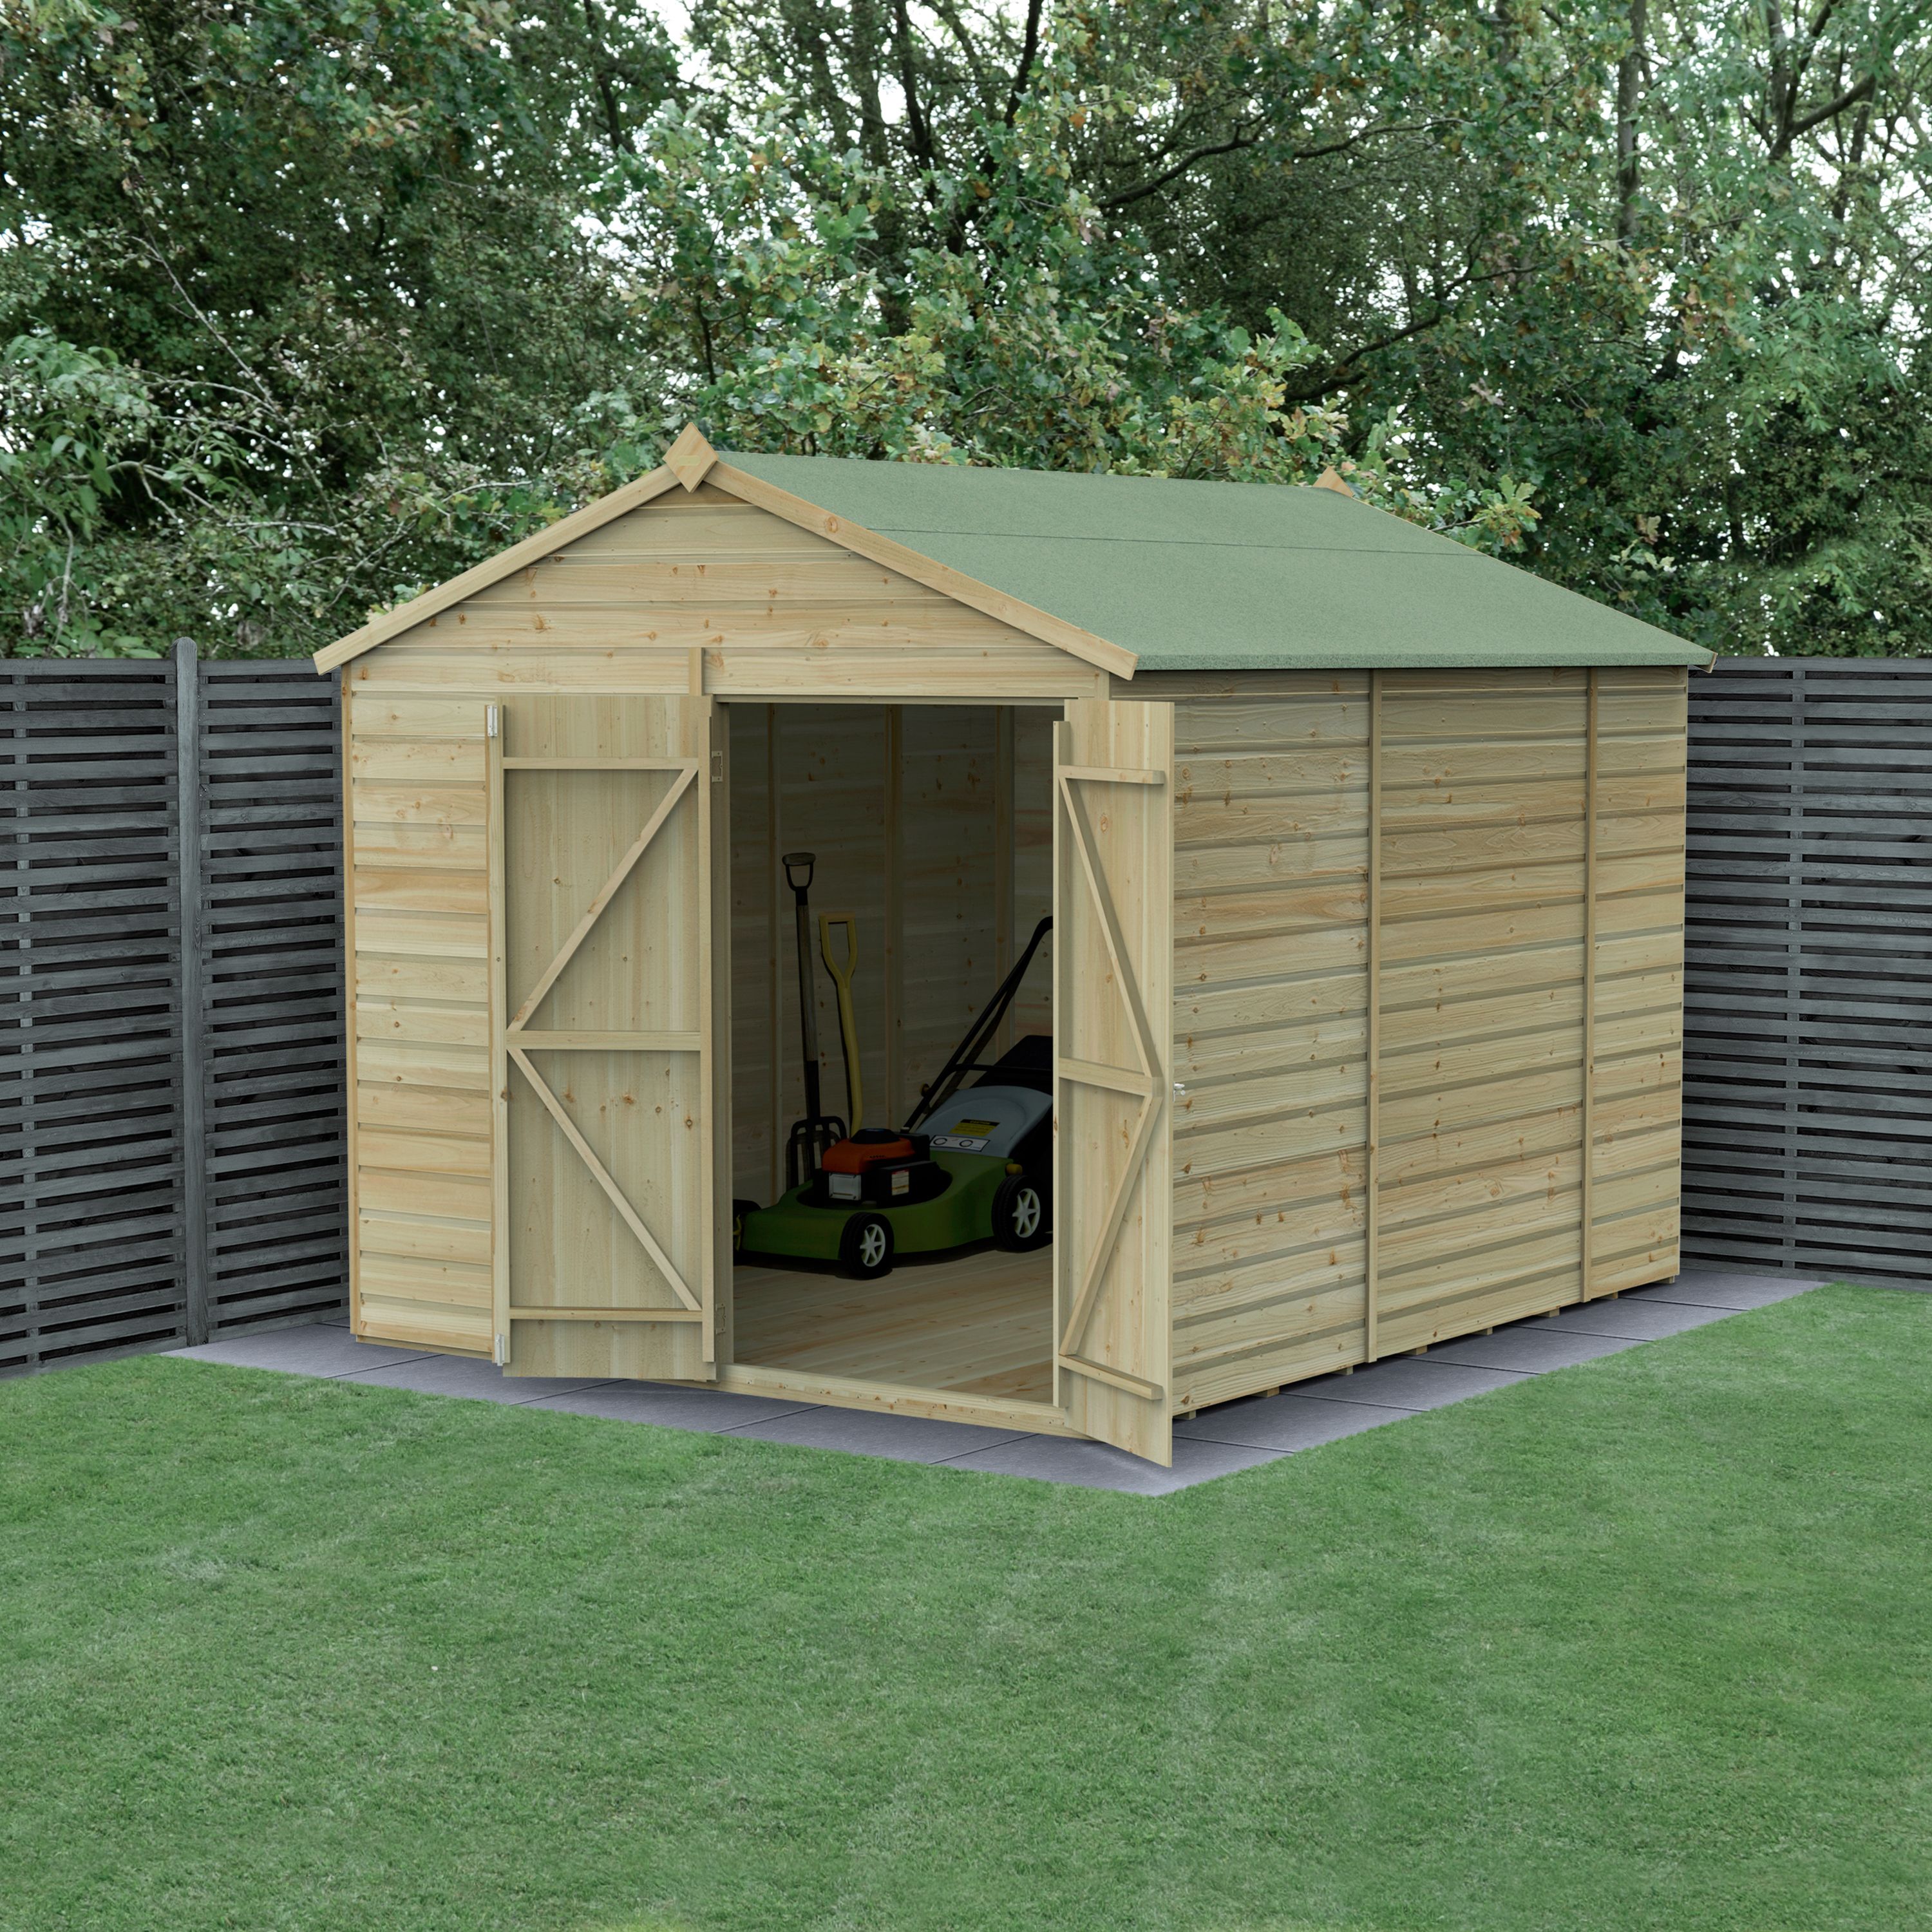 Forest Garden Beckwood Shiplap 10x8 ft Apex Natural timber Wooden Pressure treated 2 door Shed with floor - Assembly service included